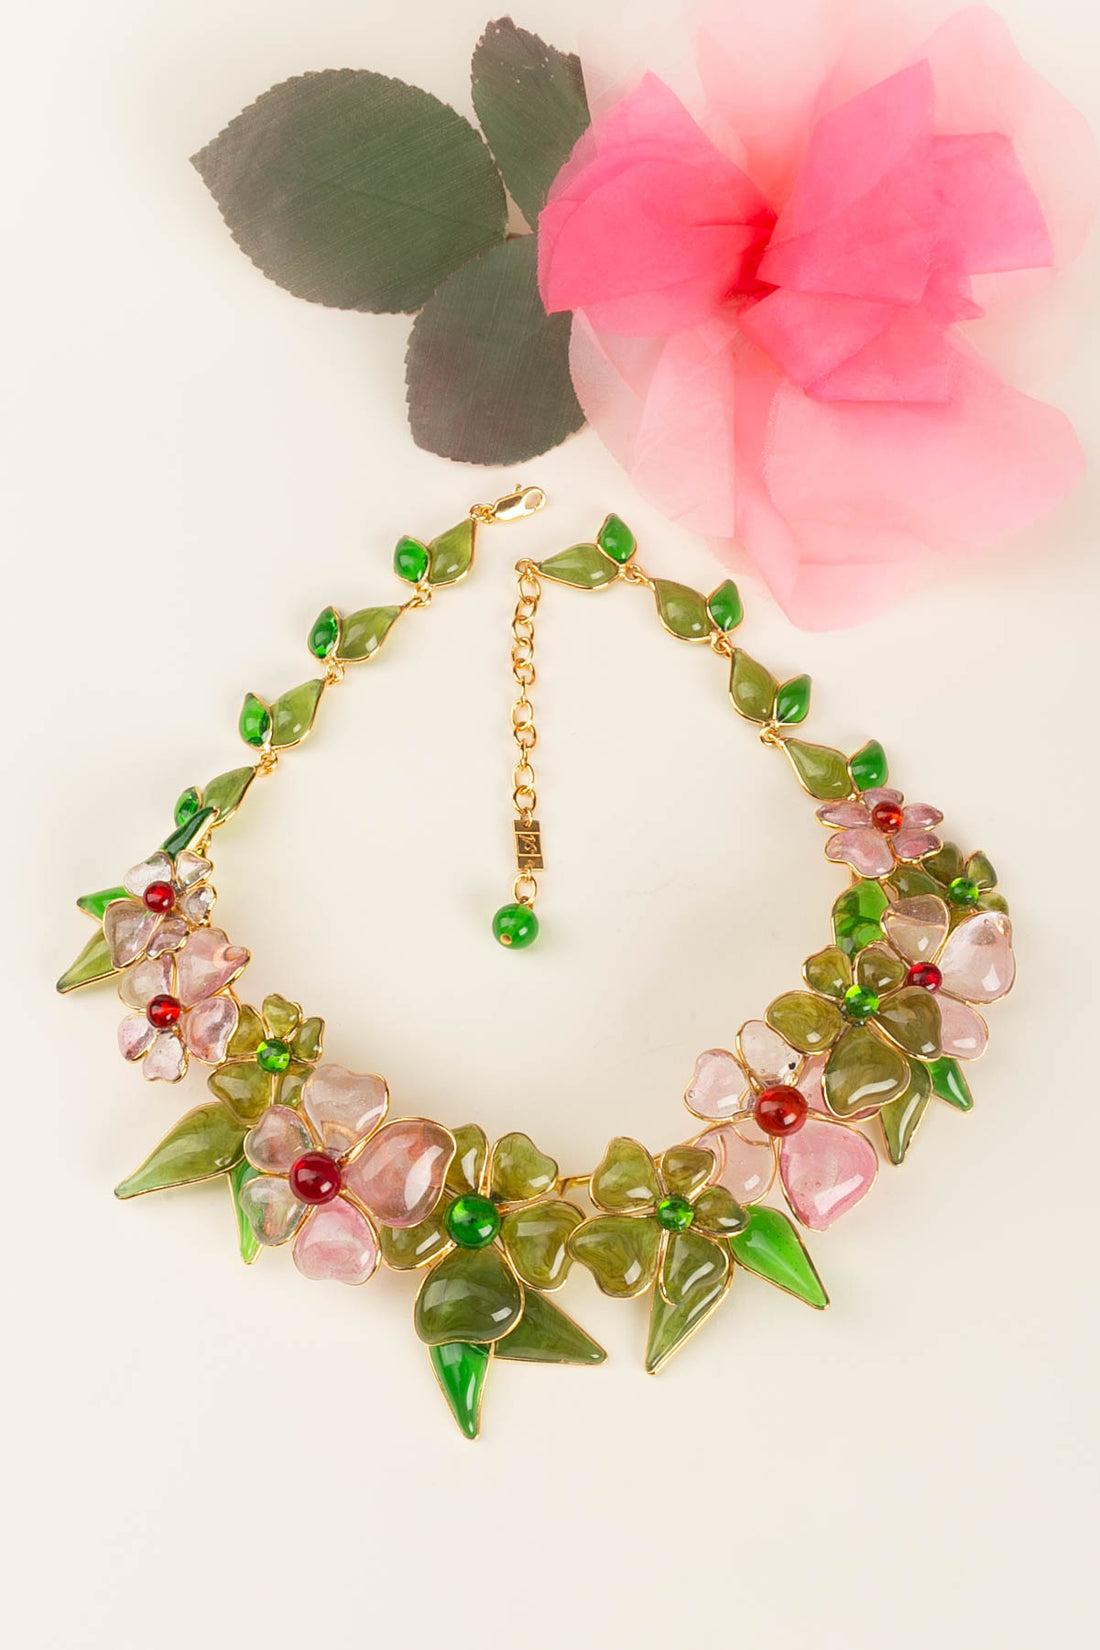 Augustine : Short gilded metal necklace decorated with glass paste flowers. Signed on a plate.

Additional information: 
Dimensions: Length: 40 cm to 46.5 cm (15.74